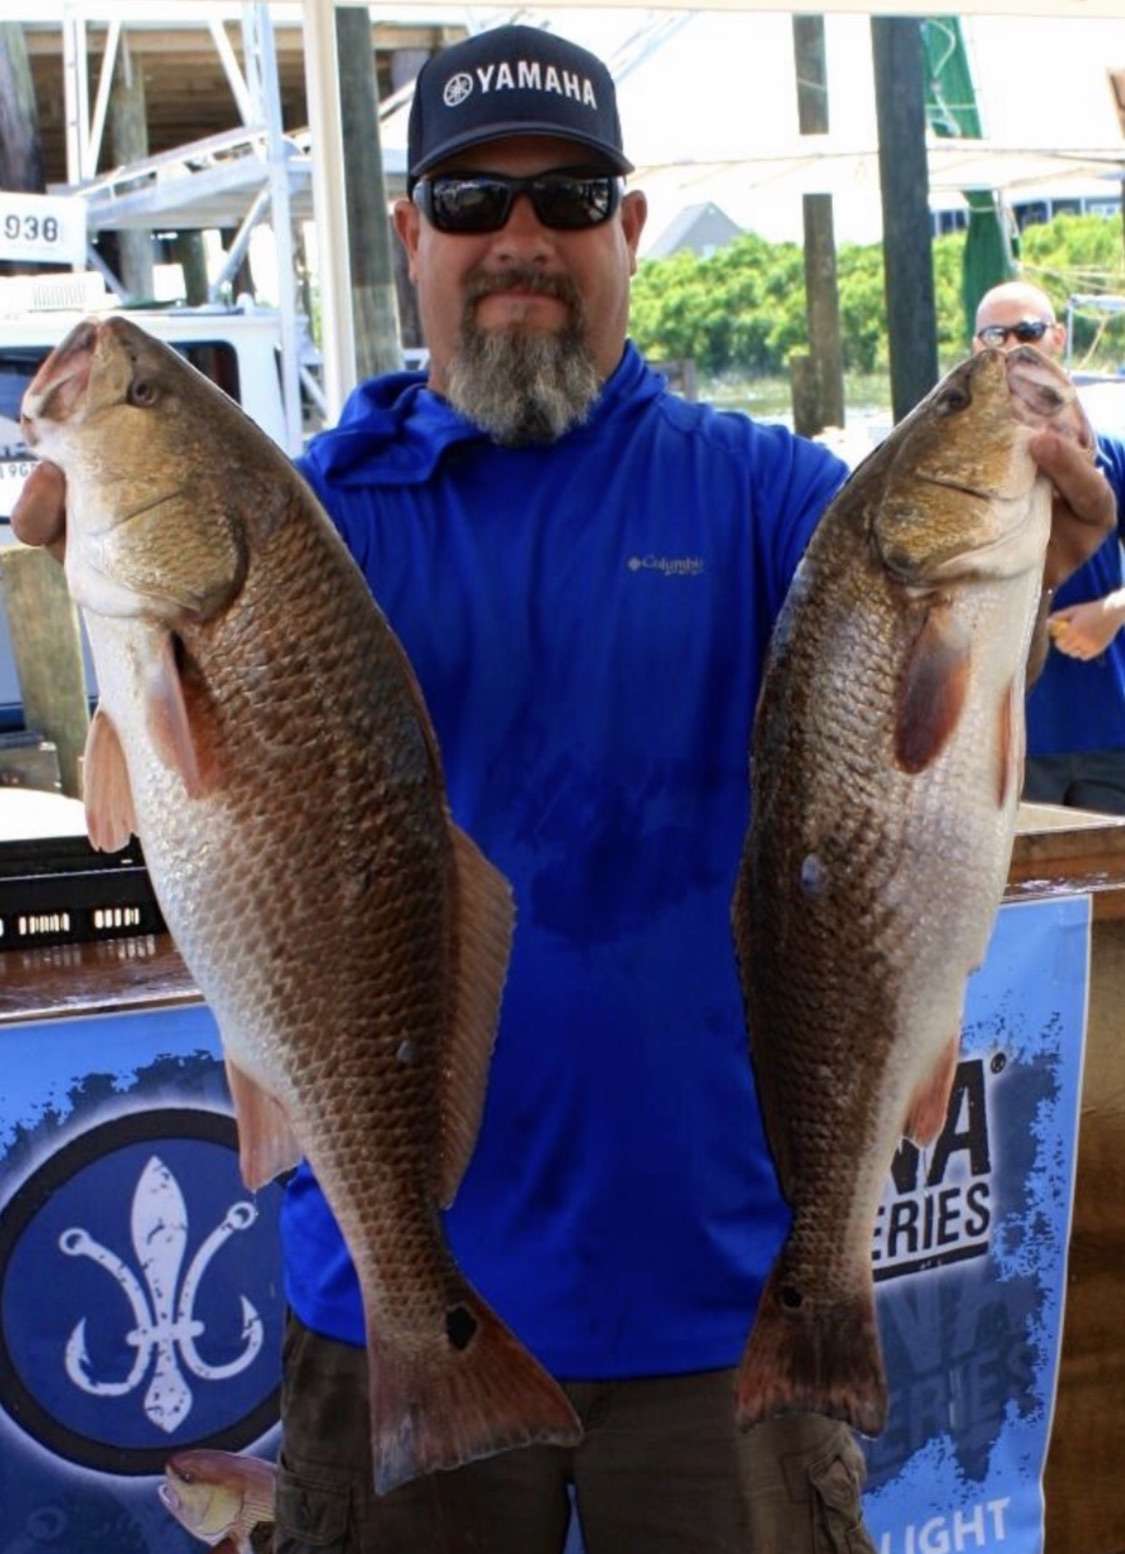 <b>Chris Kennedy</b><br>
Redfish angler Chris Kennedy of Metairie, La., has nine first-place finishes in his fishing career, including two Championship wins and a Team of the Year title. His last win was in the 2018 IFA event in Hopedale, La. In 2021, Kennedy and his teammate Chris Cenci just missed Power-Pole Team of the Year honors finishing second overall for the season.
